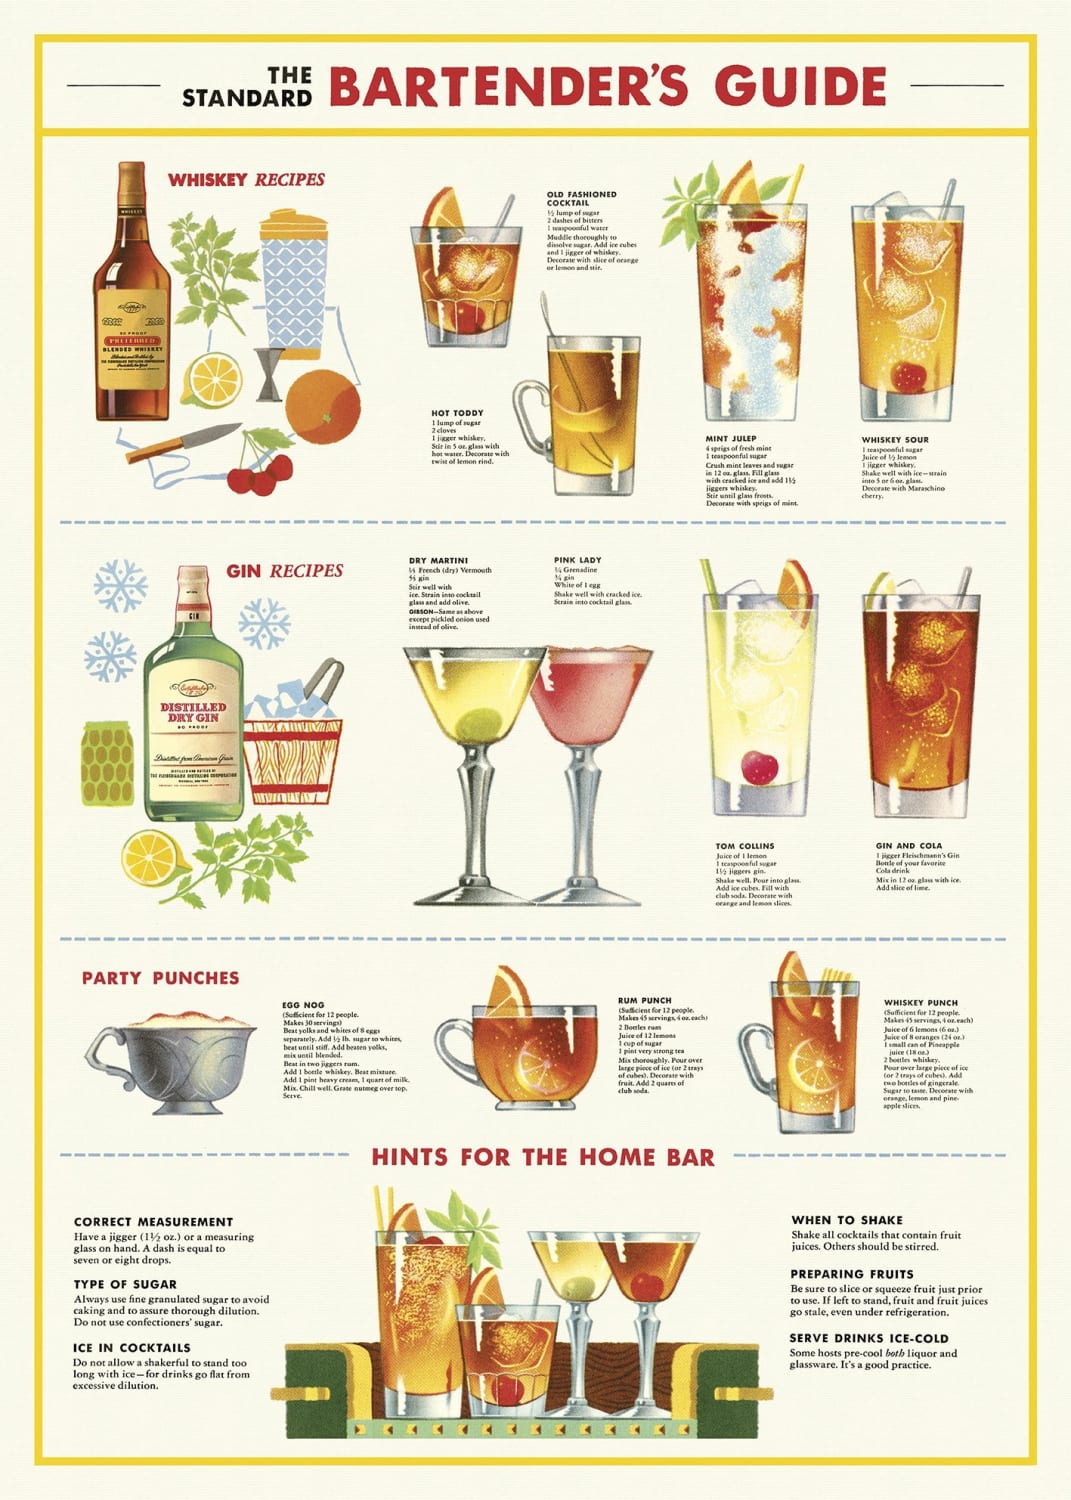 Straightforward and very helpful guide for making classic drinks.